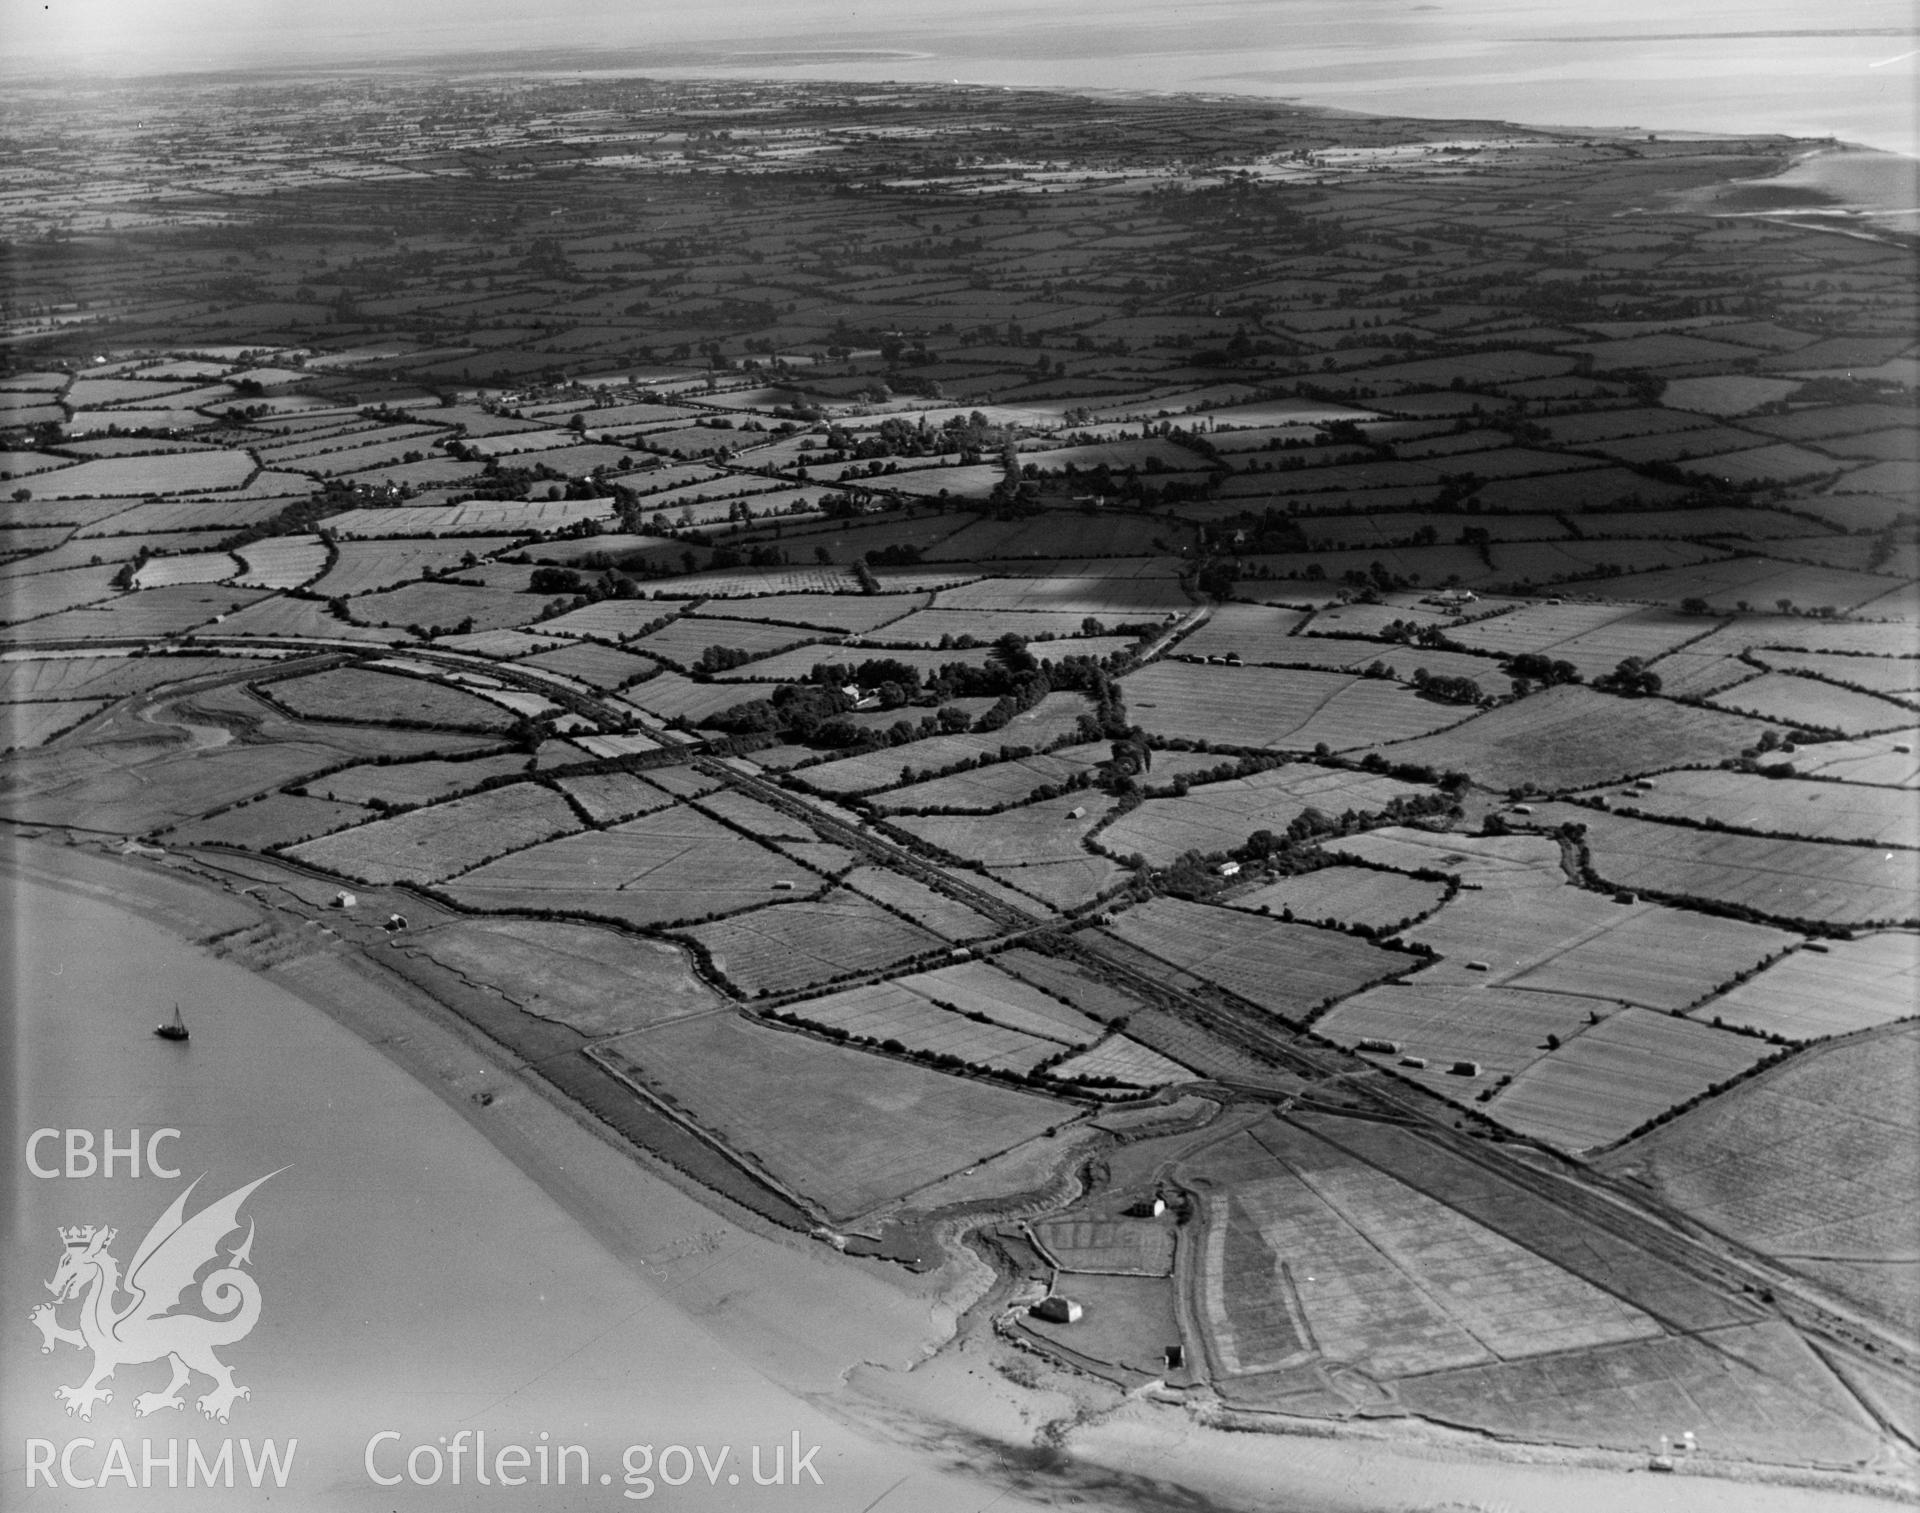 View showing area near Nash, Newport, oblique aerial view. 5?x4? black and white glass plate negative.